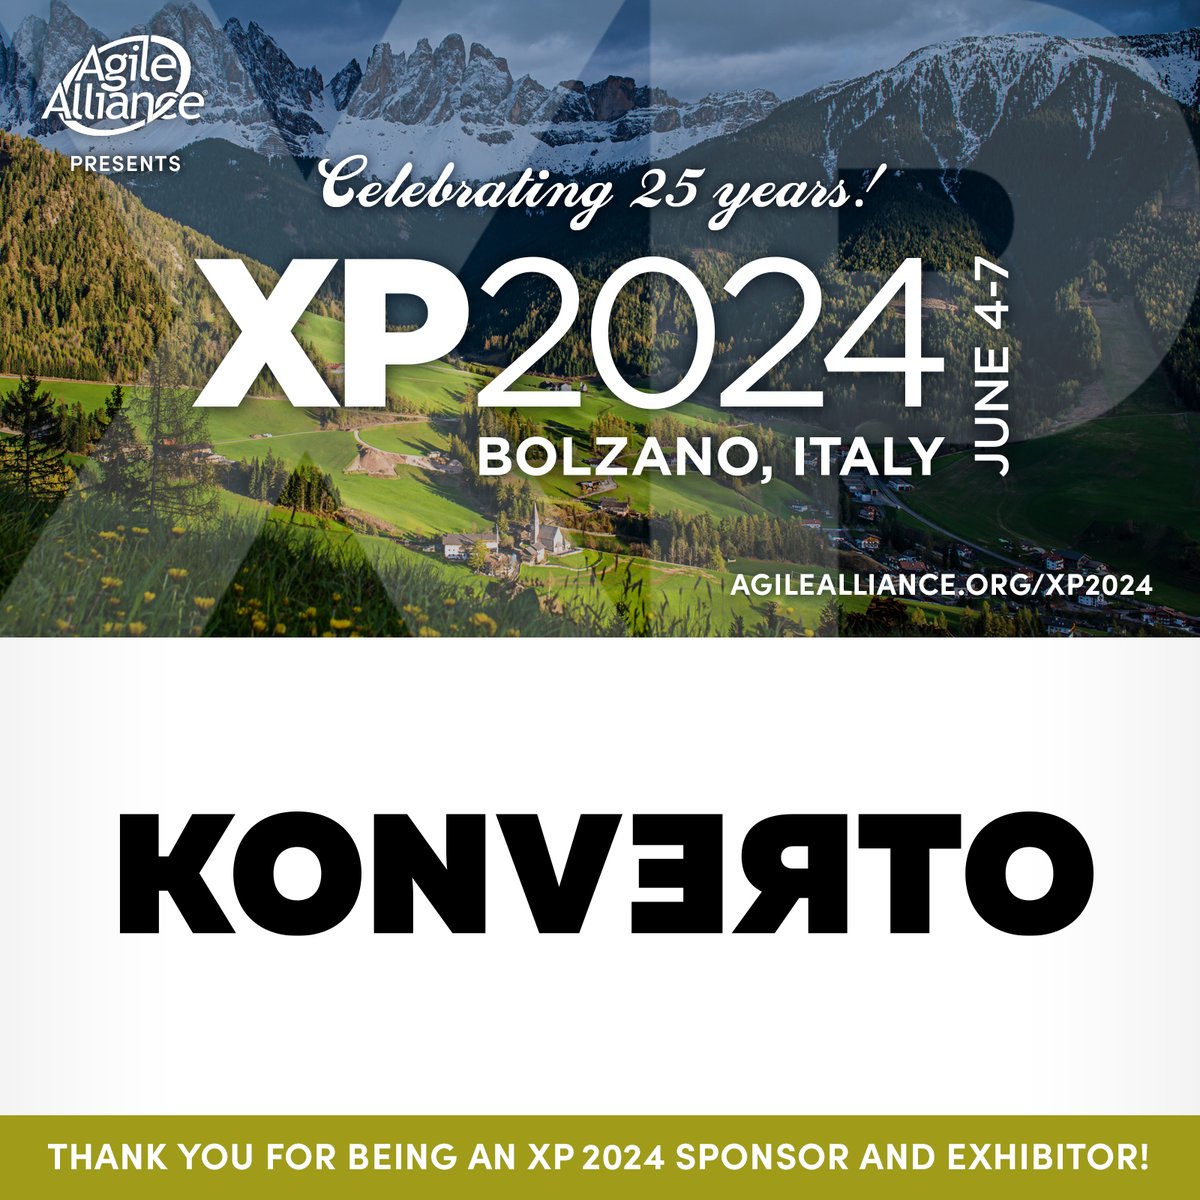 We're incredibly grateful to Konverto for being a sponsor for #XP2024 next week in Bolzano, Italy! Please join us in thanking them for their valued support as we celebrate the 25th Anniversary of XP. Visit KONVERTO at XP 2024! agilealliance.org/xp2024/ #Agile #XP #XPConf